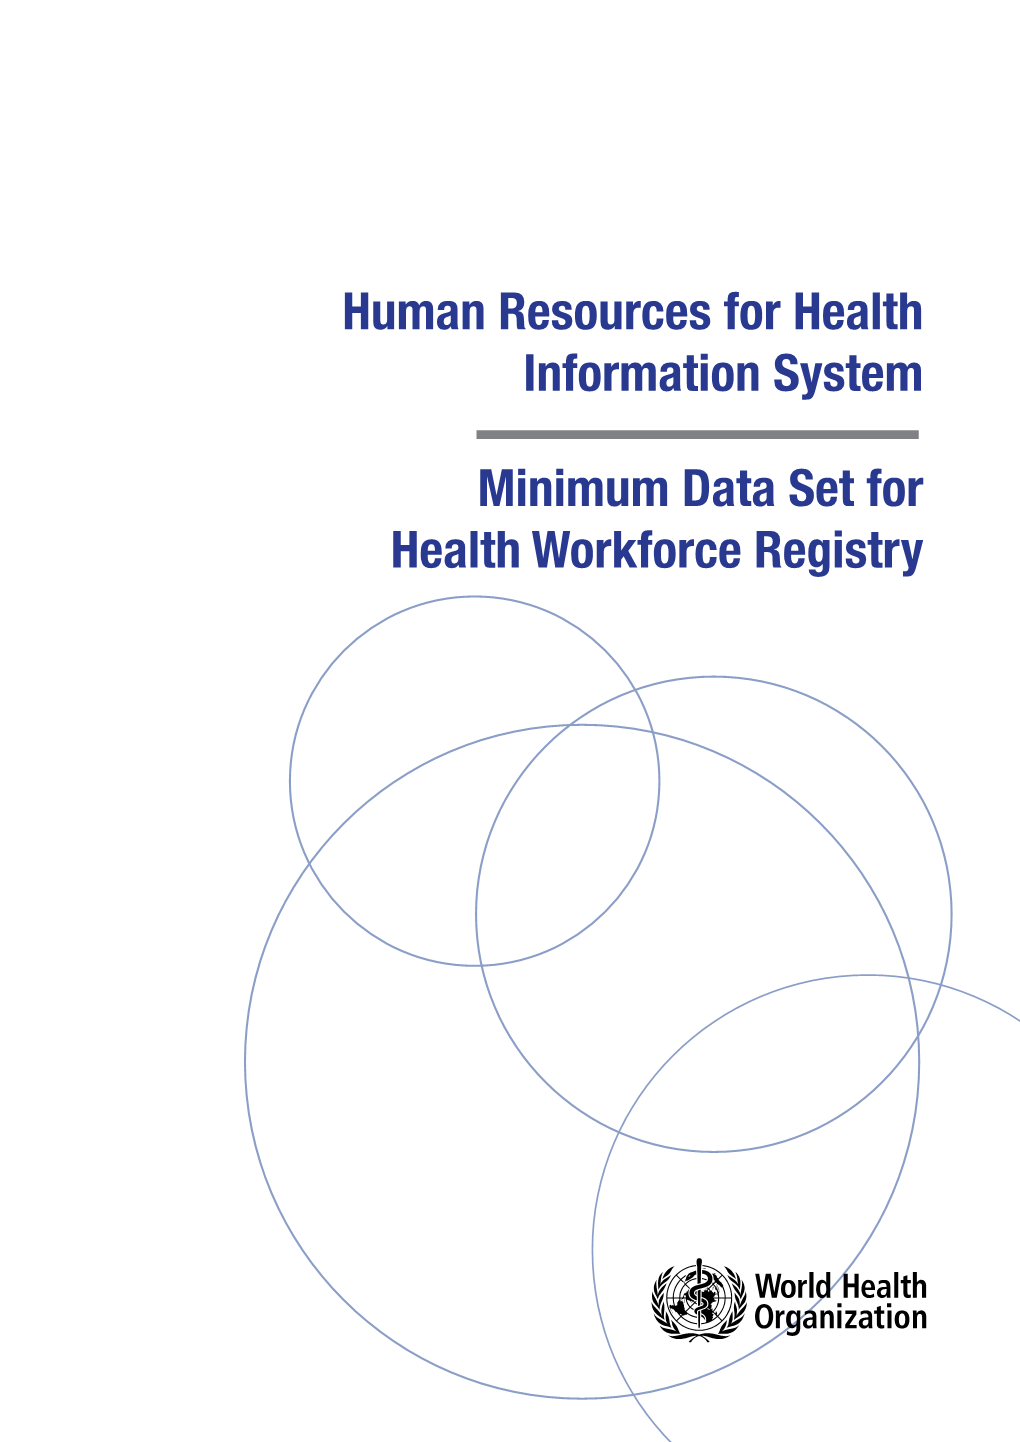 Human Resources for Health Information System Minimum Data